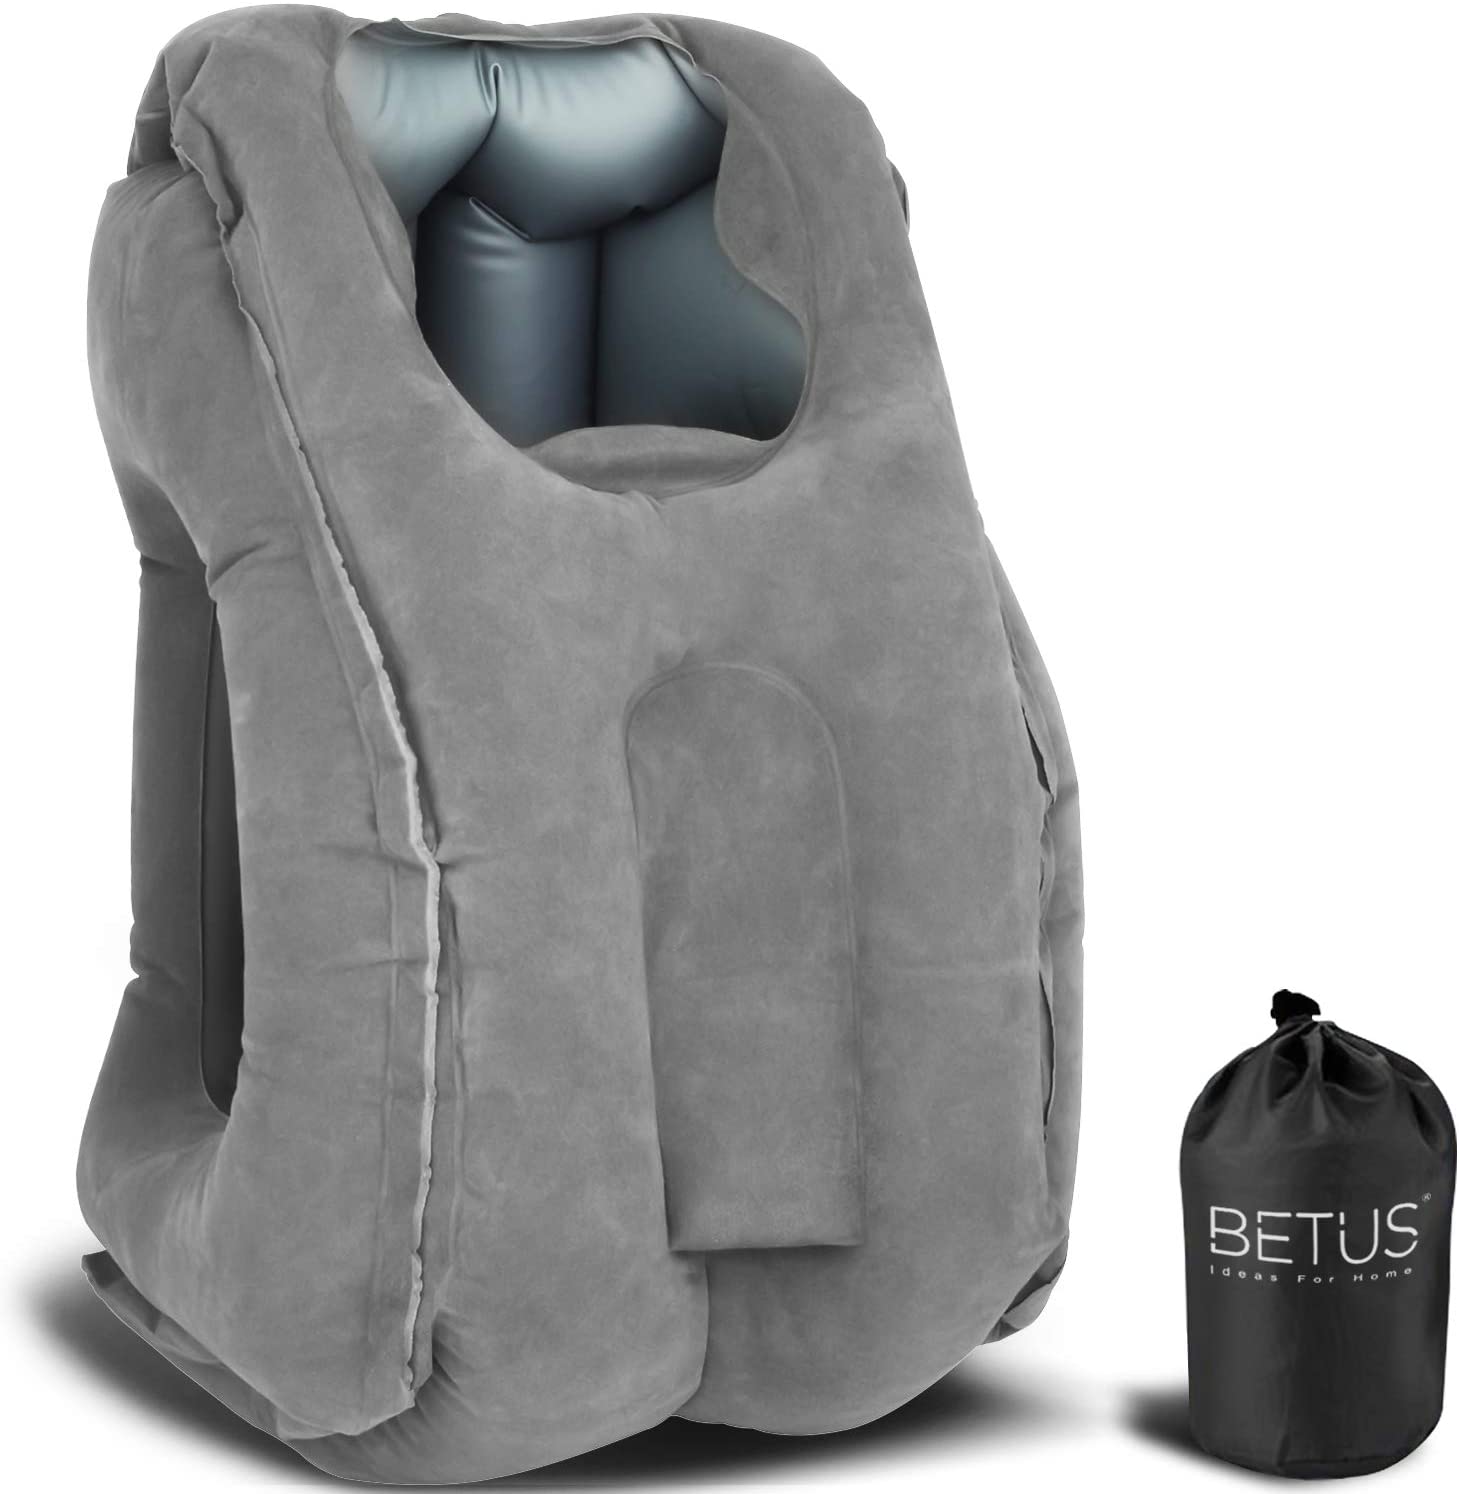 Betus Comfort Inflatable Travel Pillow for Airplane - Neck Head Rest Pillow - image 1 of 8